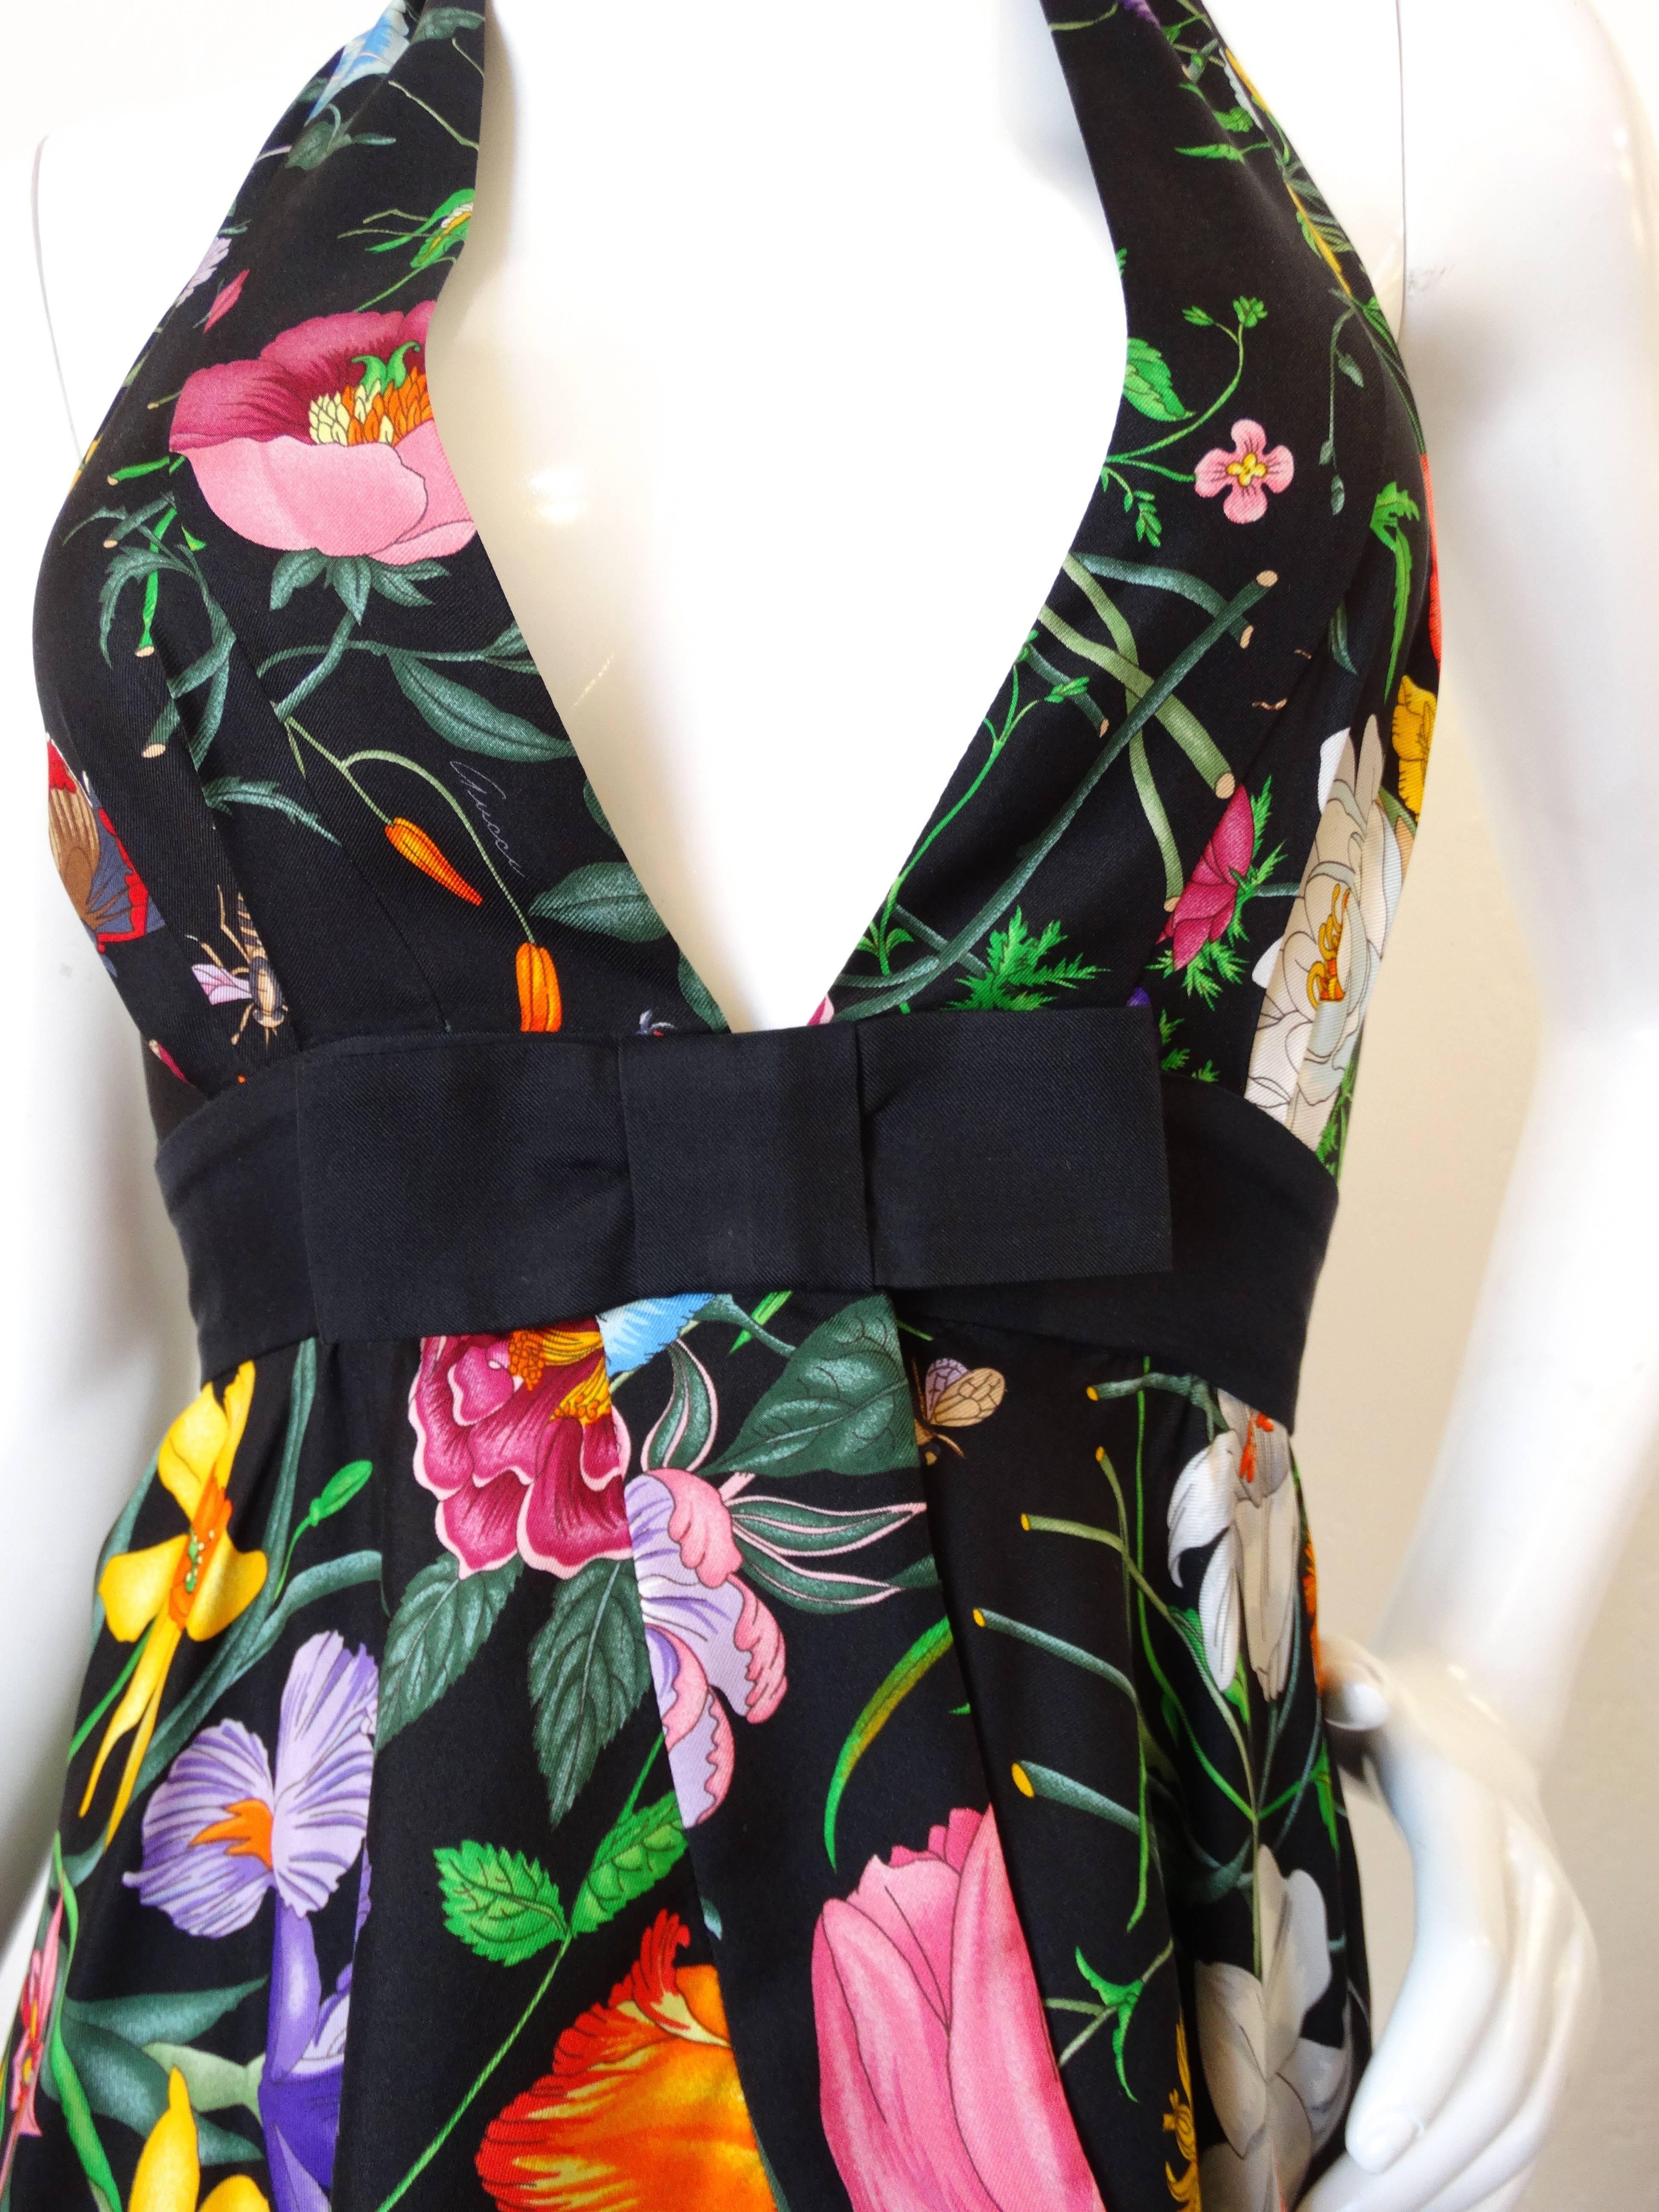 Late 1990's Gucci floral printed halter top! Snap closure beneath the black bow detail just below the bust. Ties at the neck. Halter fit allows for a range of bust sizes, best fits a small. Marked a size 38 Made in Italy 